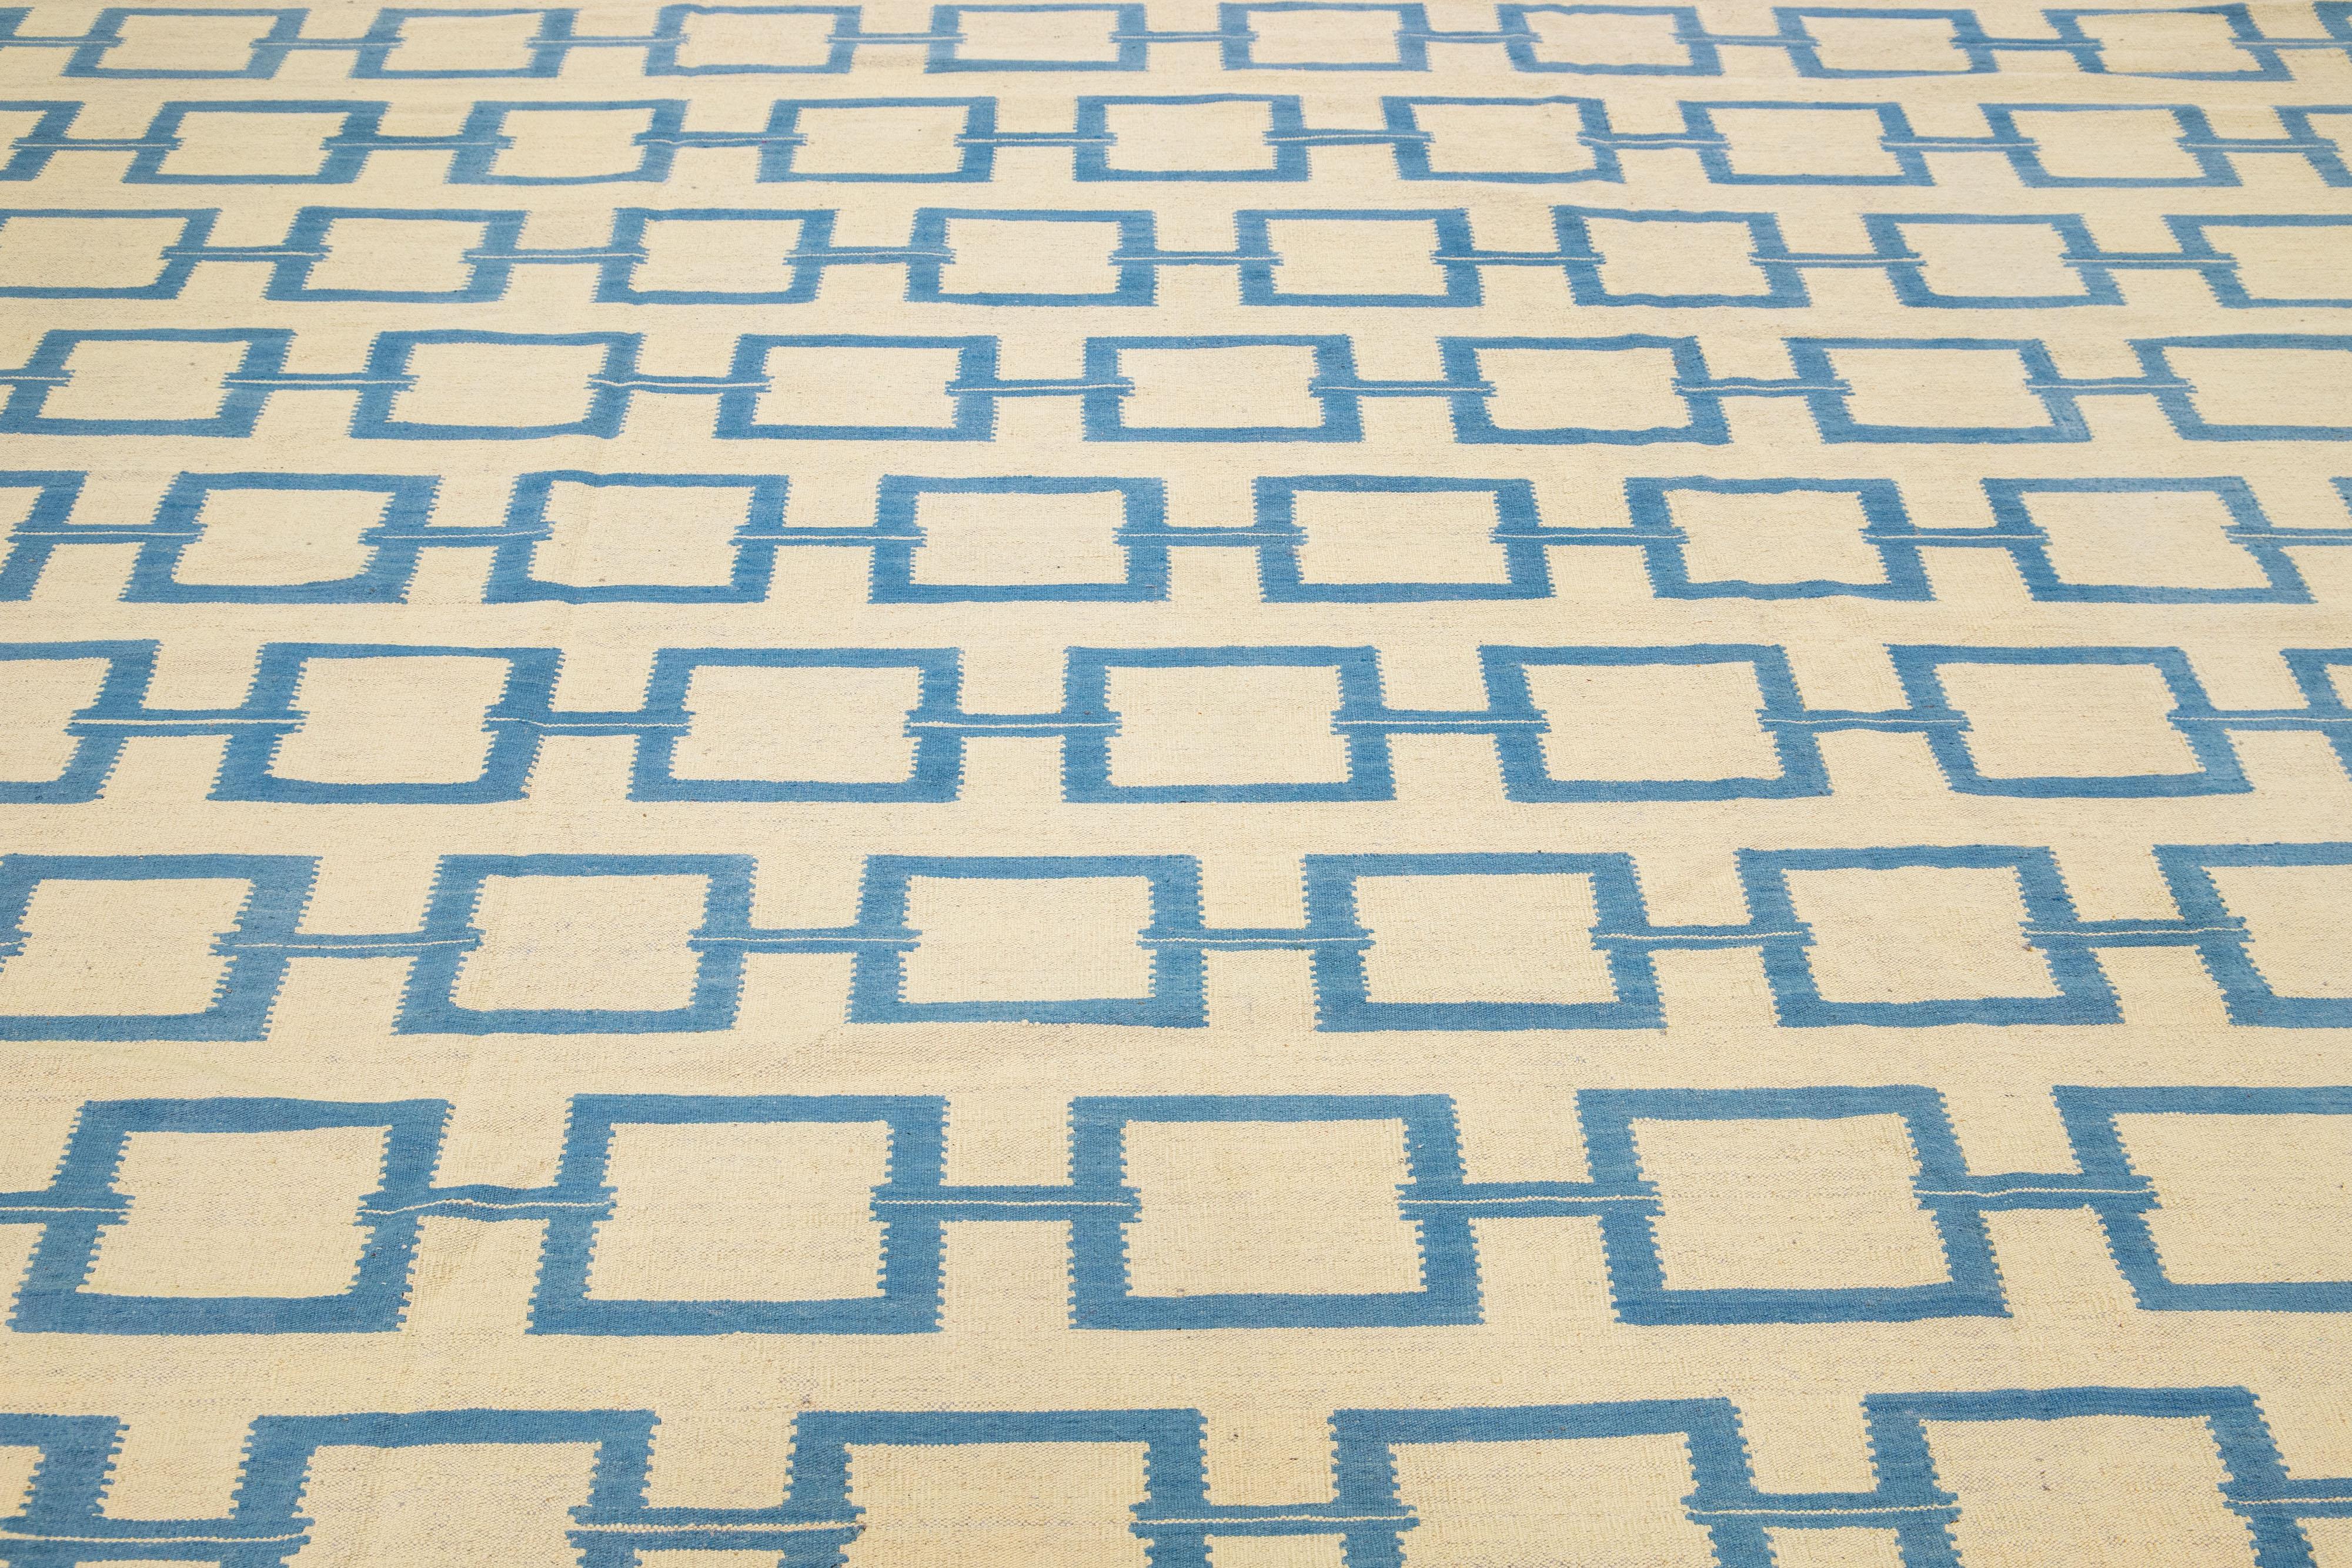 This contemporary Kilim rug is meticulously handwoven with a dominant beige field, highlighted by intricate geometric patterns in shades of blue, providing subtle yet elegant accents.

This rug measures 10'4